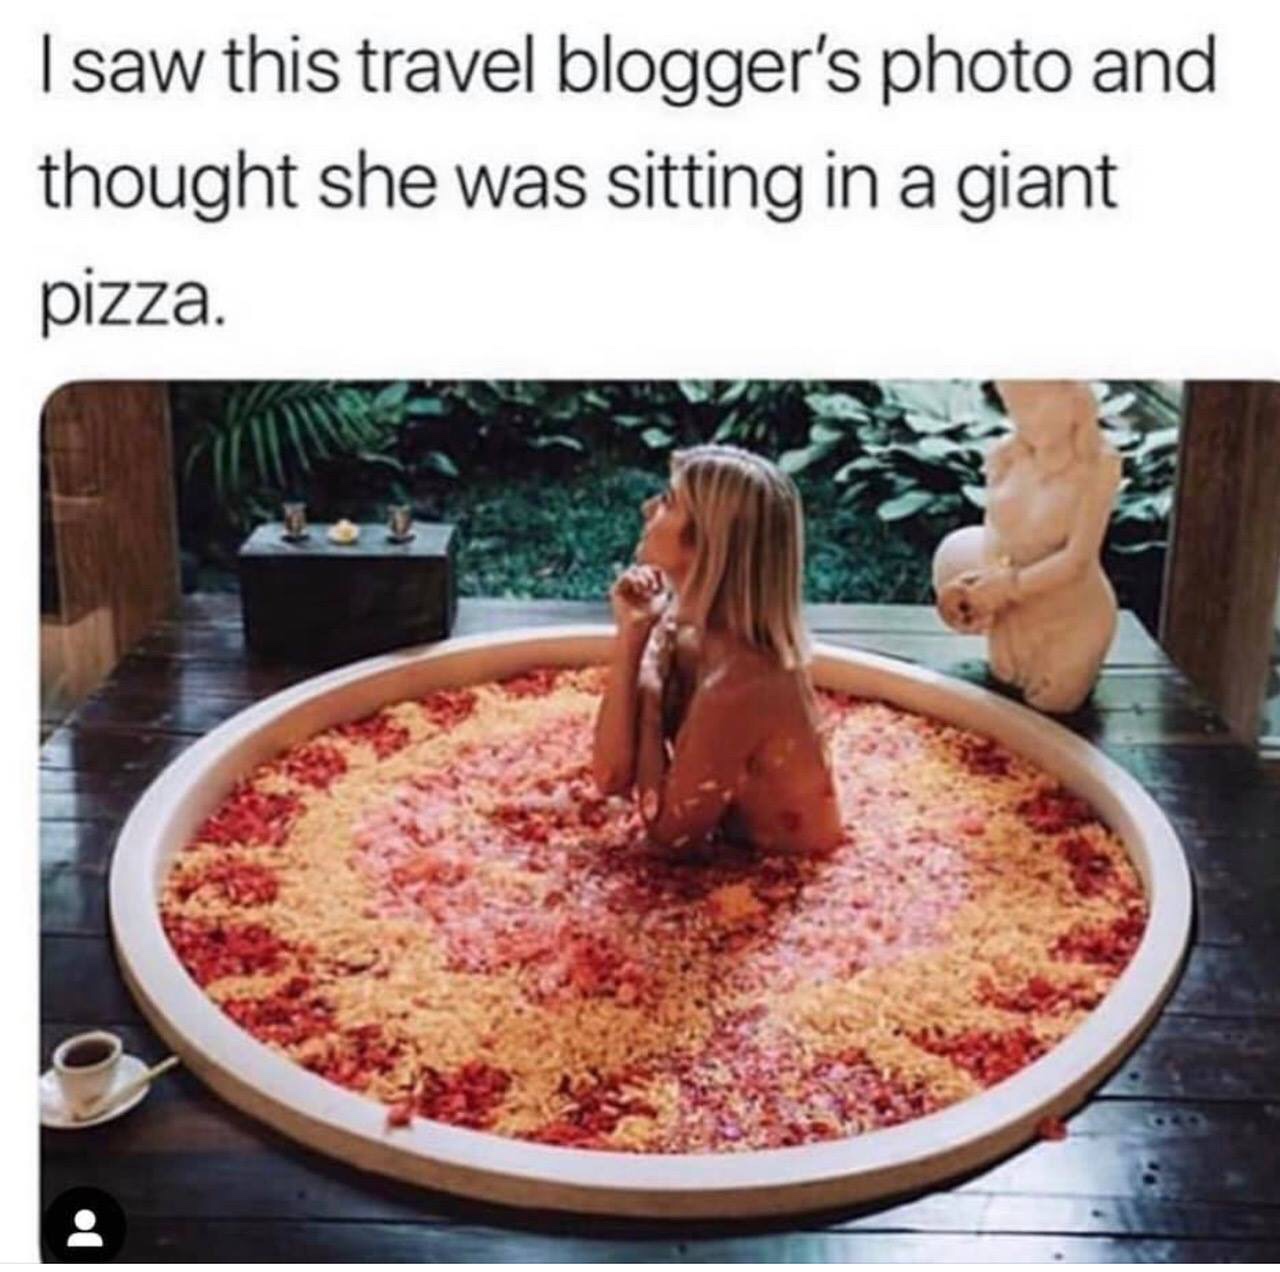 dish - I saw this travel blogger's photo and thought she was sitting in a giant pizza.